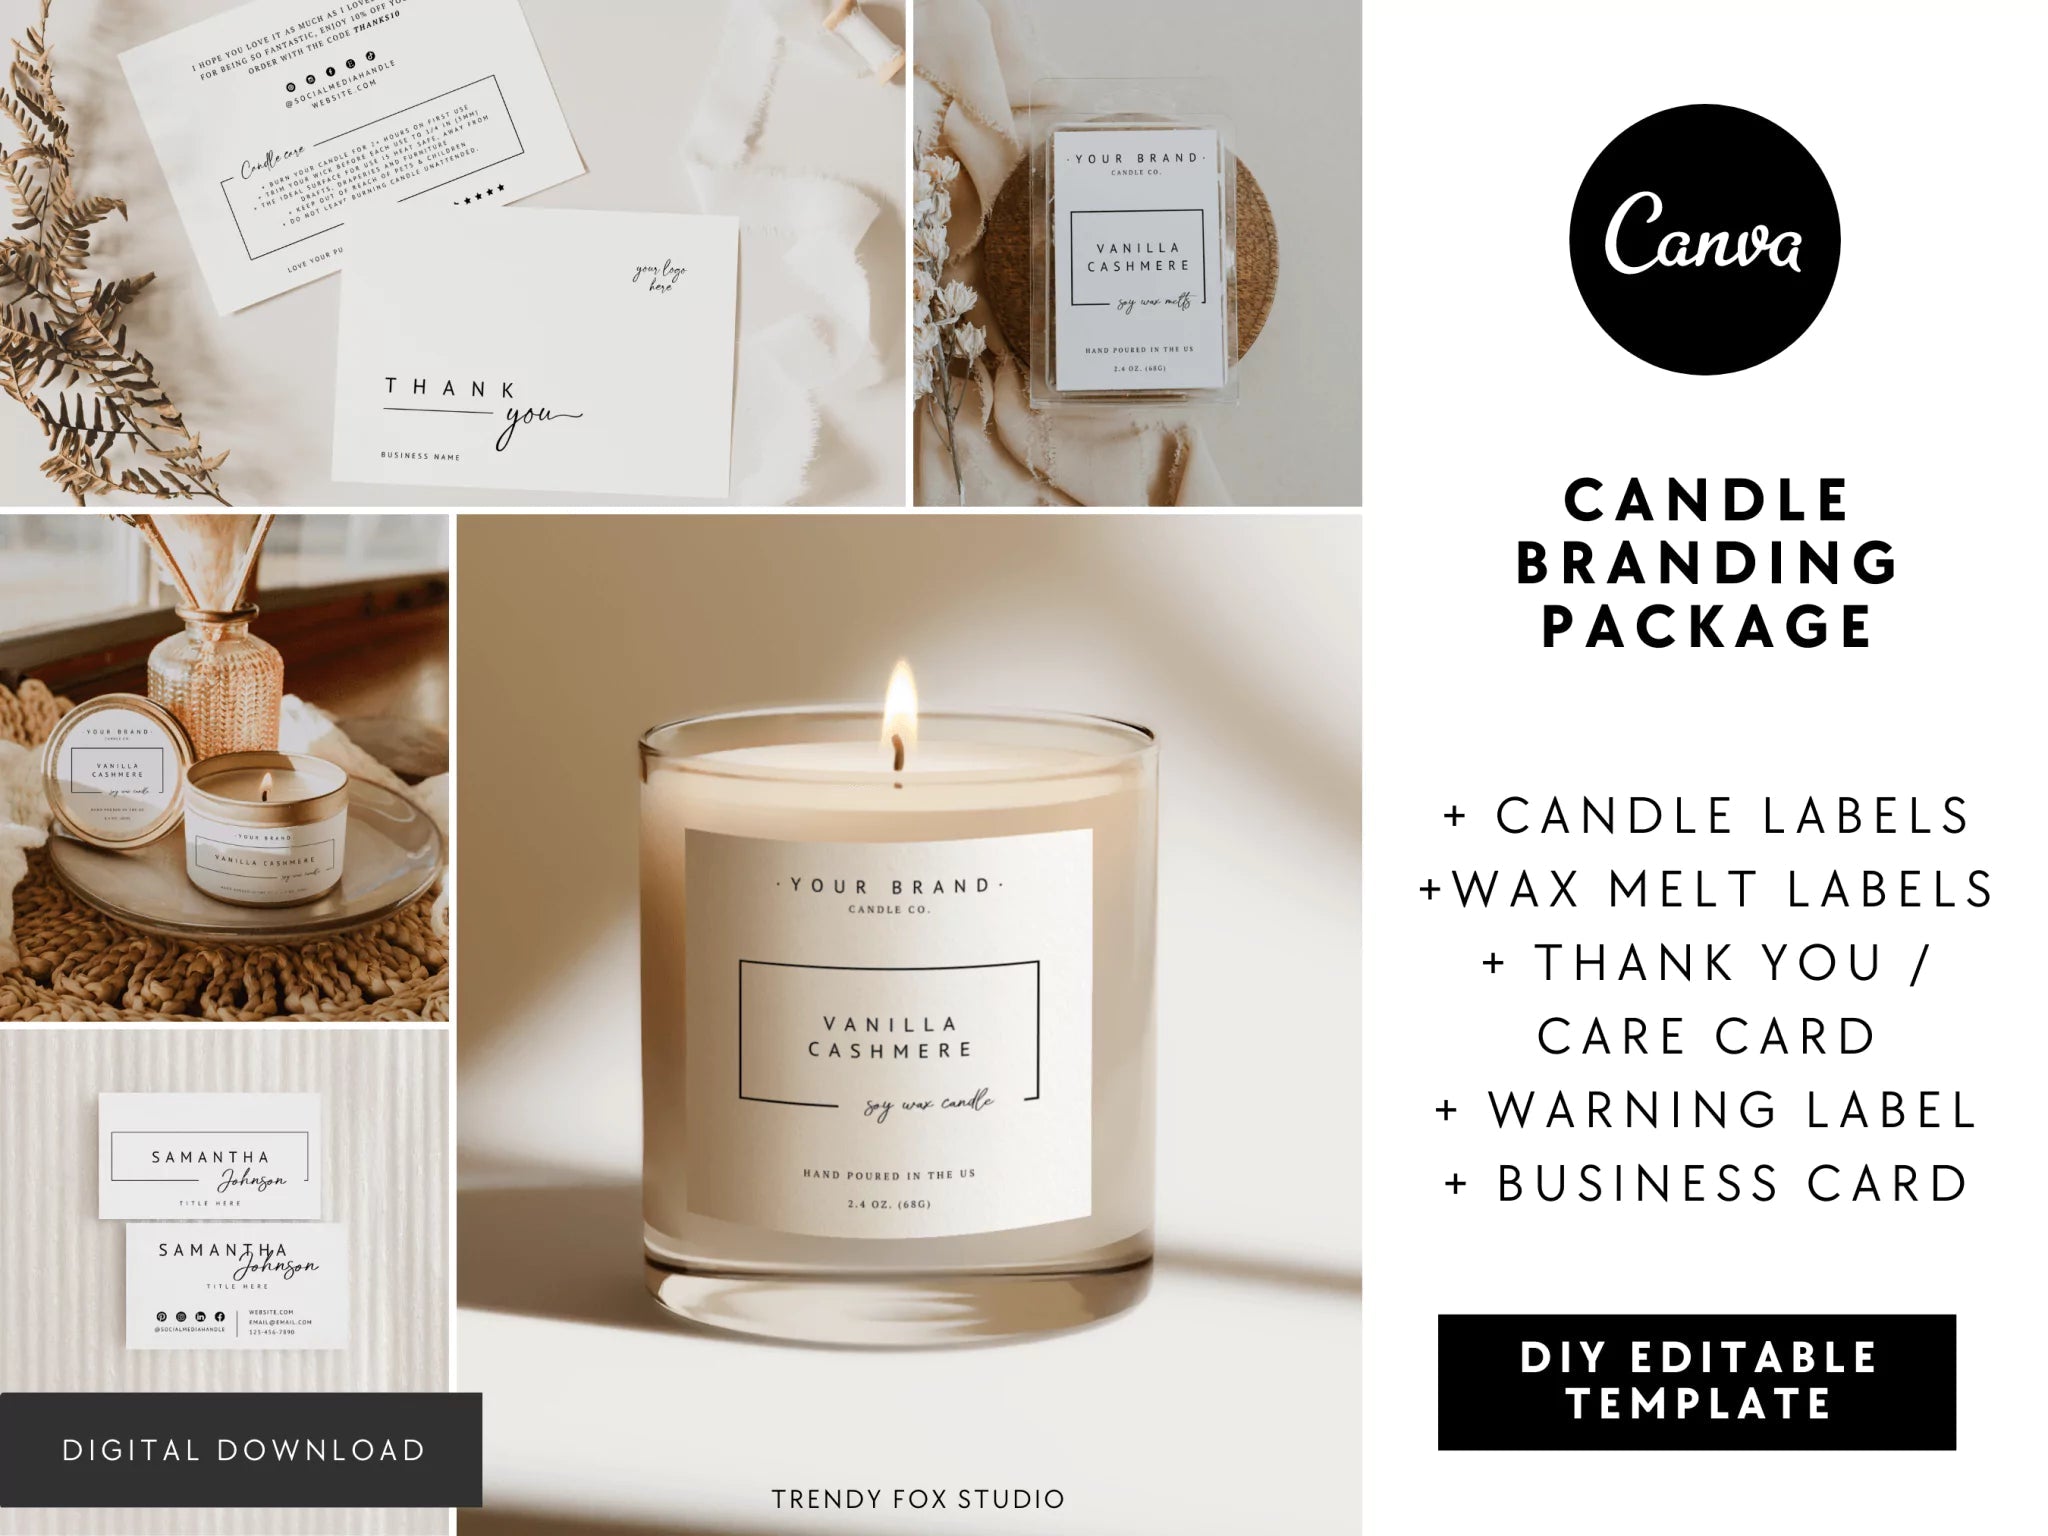 MONOCHROME Candle Label, MODERN Candle Sticker, Thin Candle Label